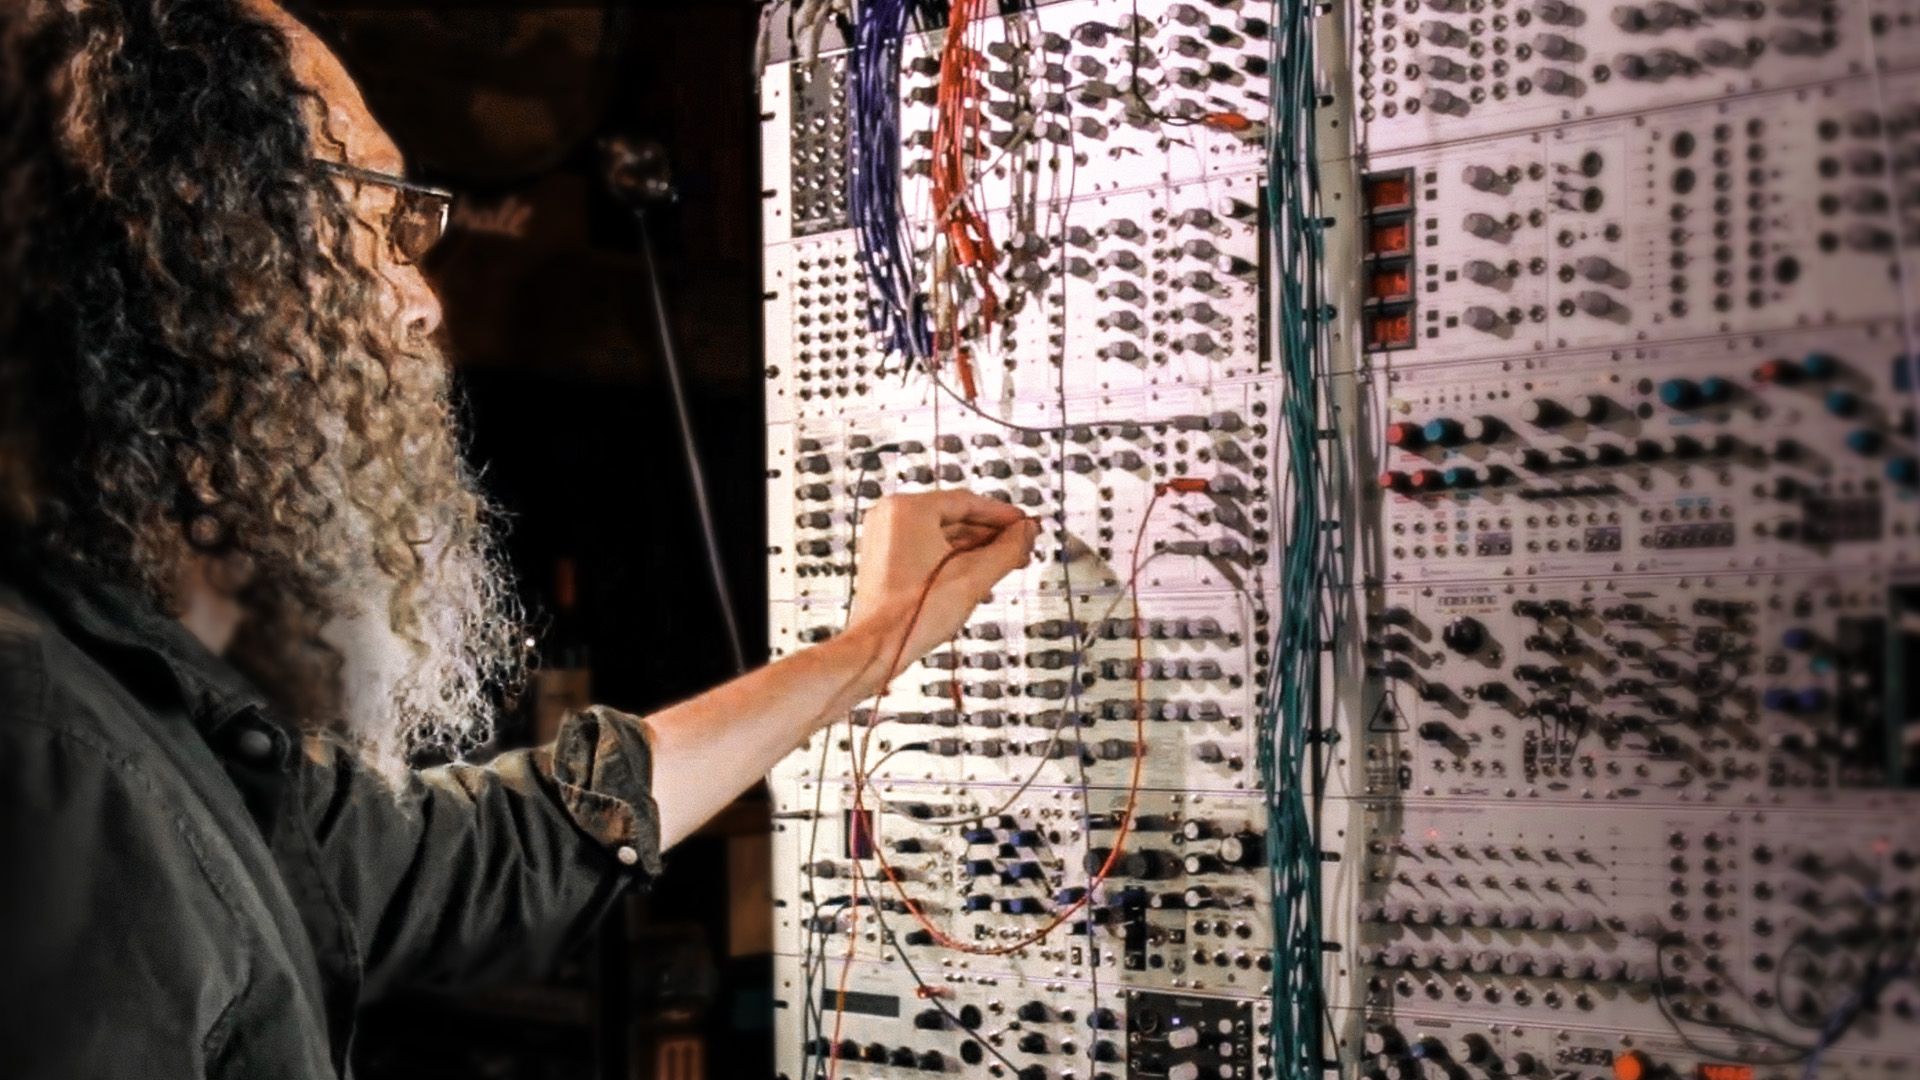 Modular synthesizers